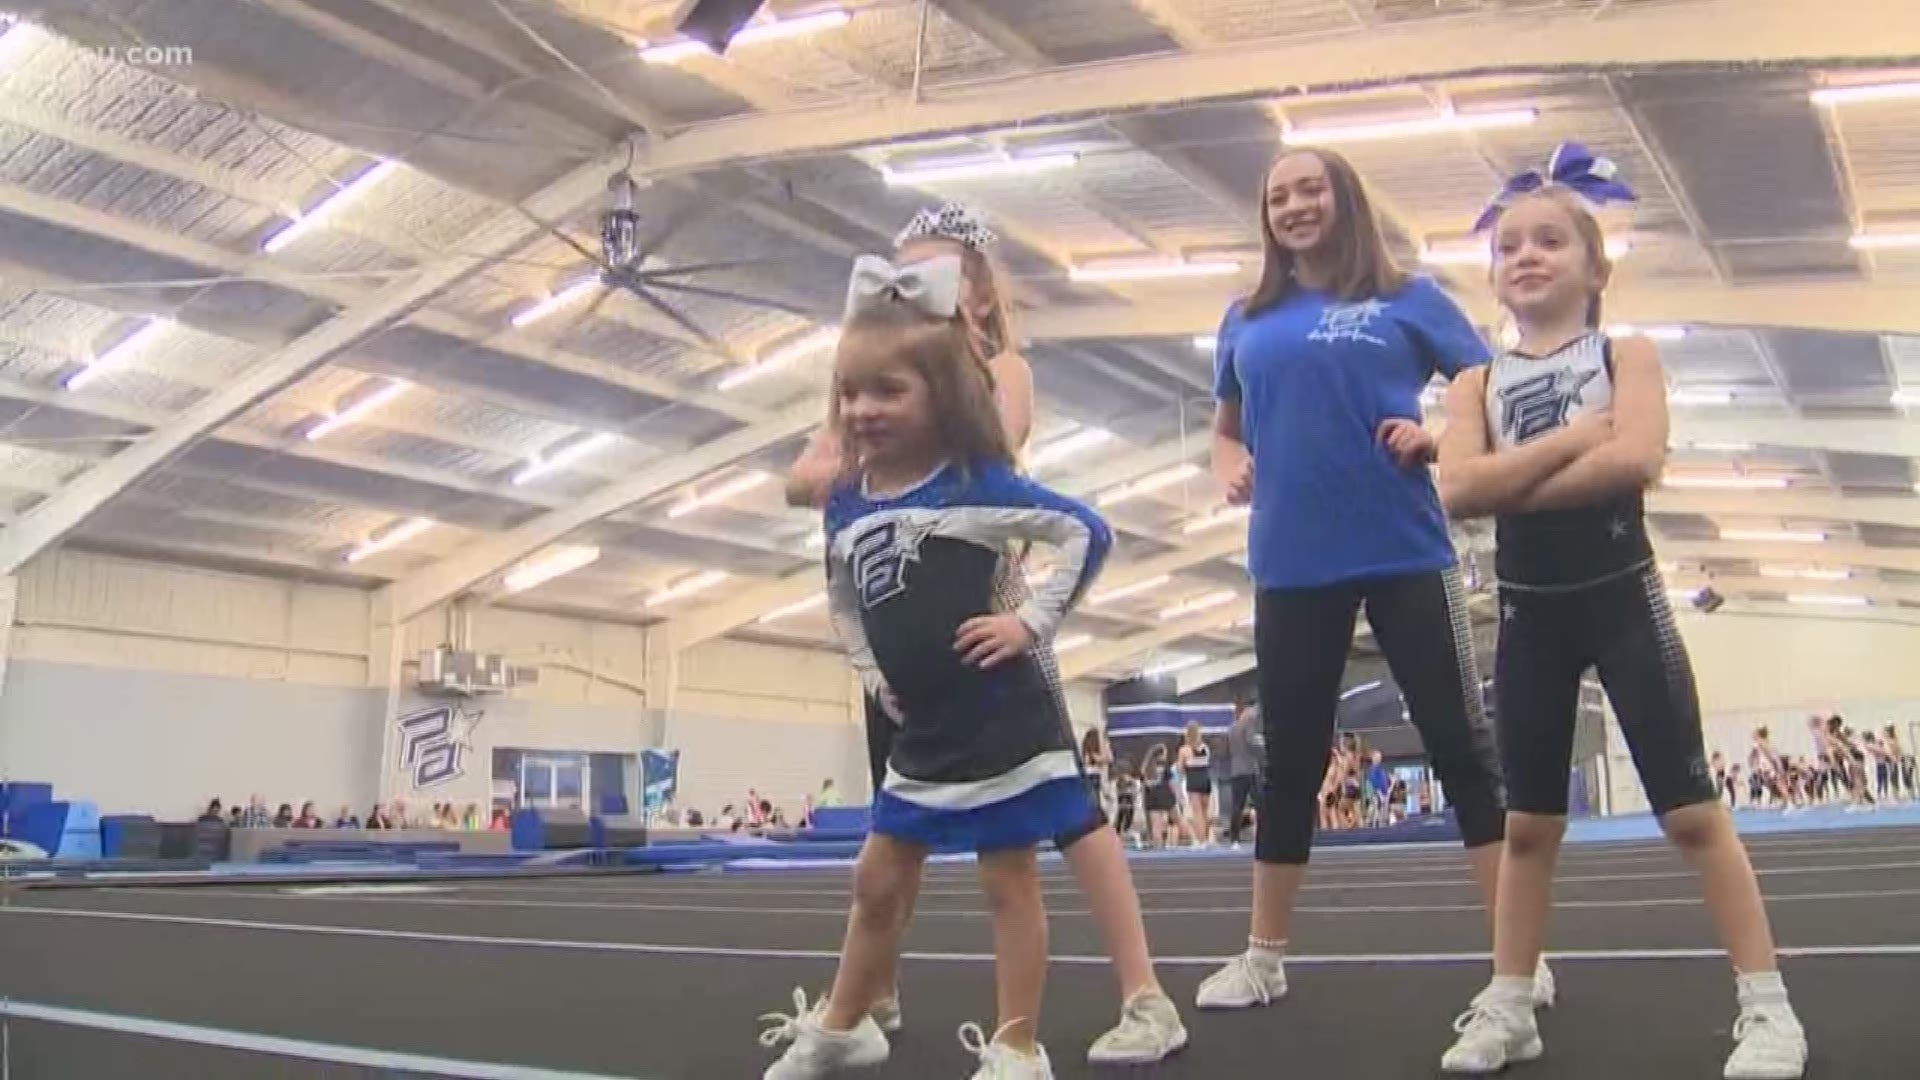 A video of 4-year-old Kynzee Bryan, an incredibly talented pint-sized cheerleader from Cypress, is going viral.